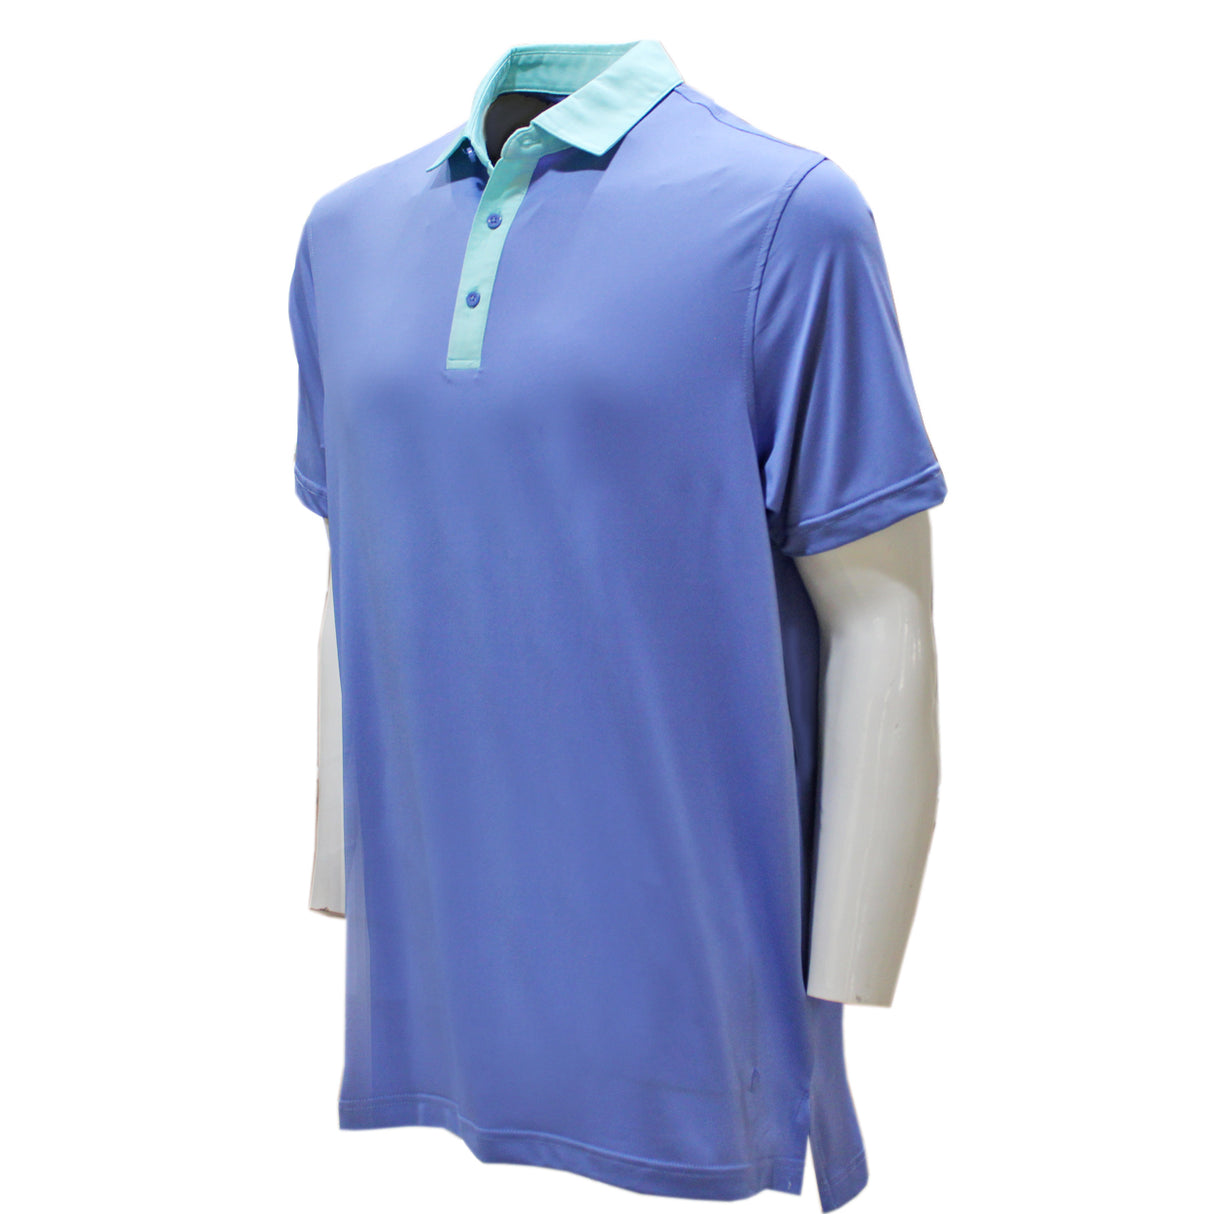 Head Men's Two-Tone Solid Polo Golf Shirt